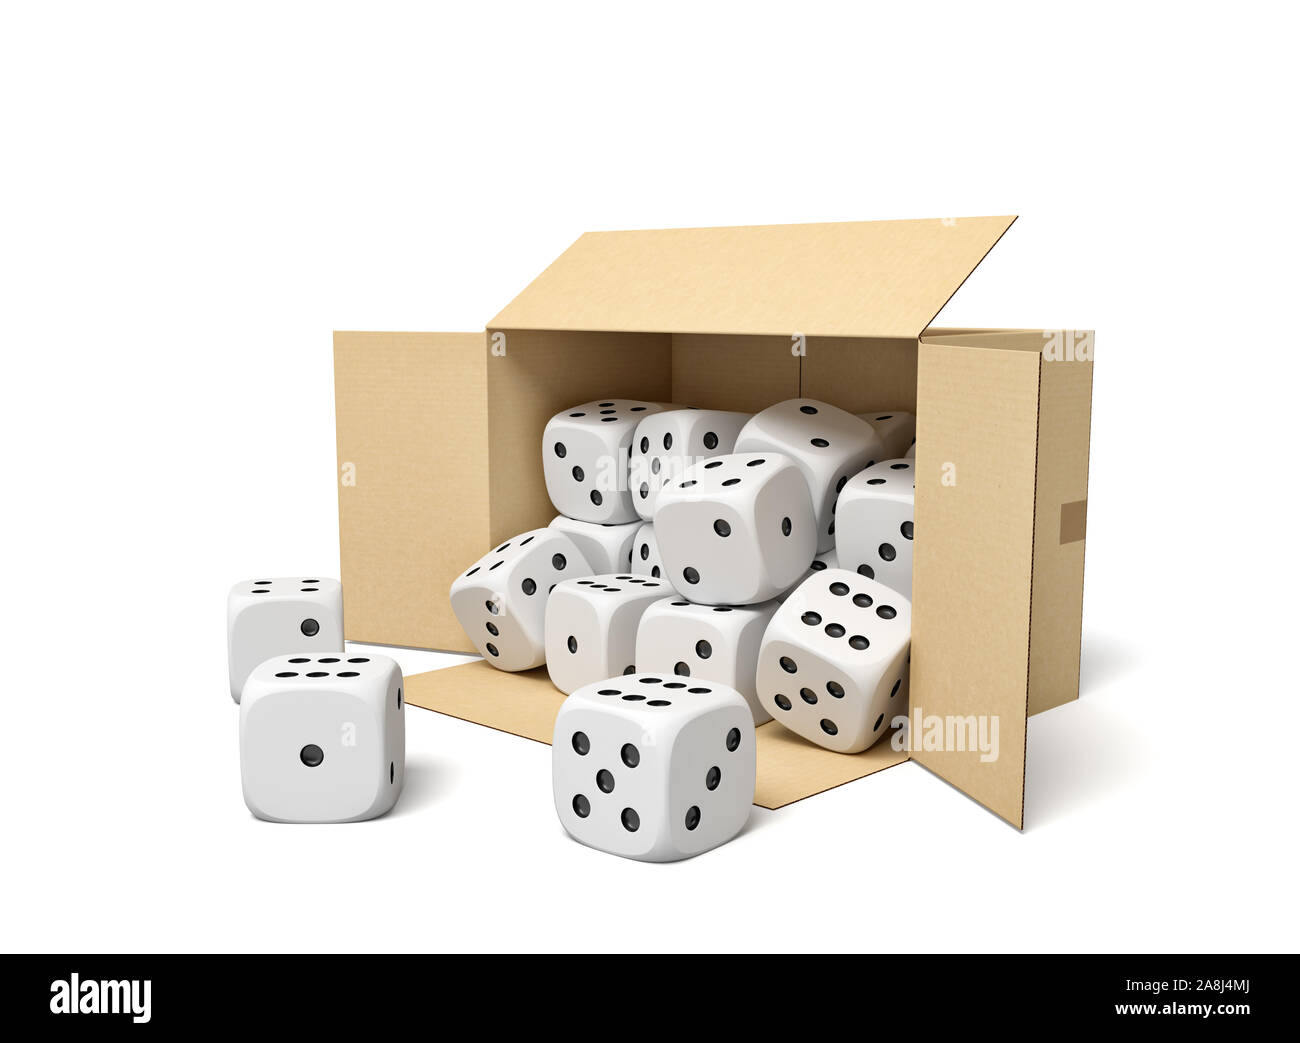 3d rendering of cardboard box lying sidelong full of white dice with black spots. Stock Photo